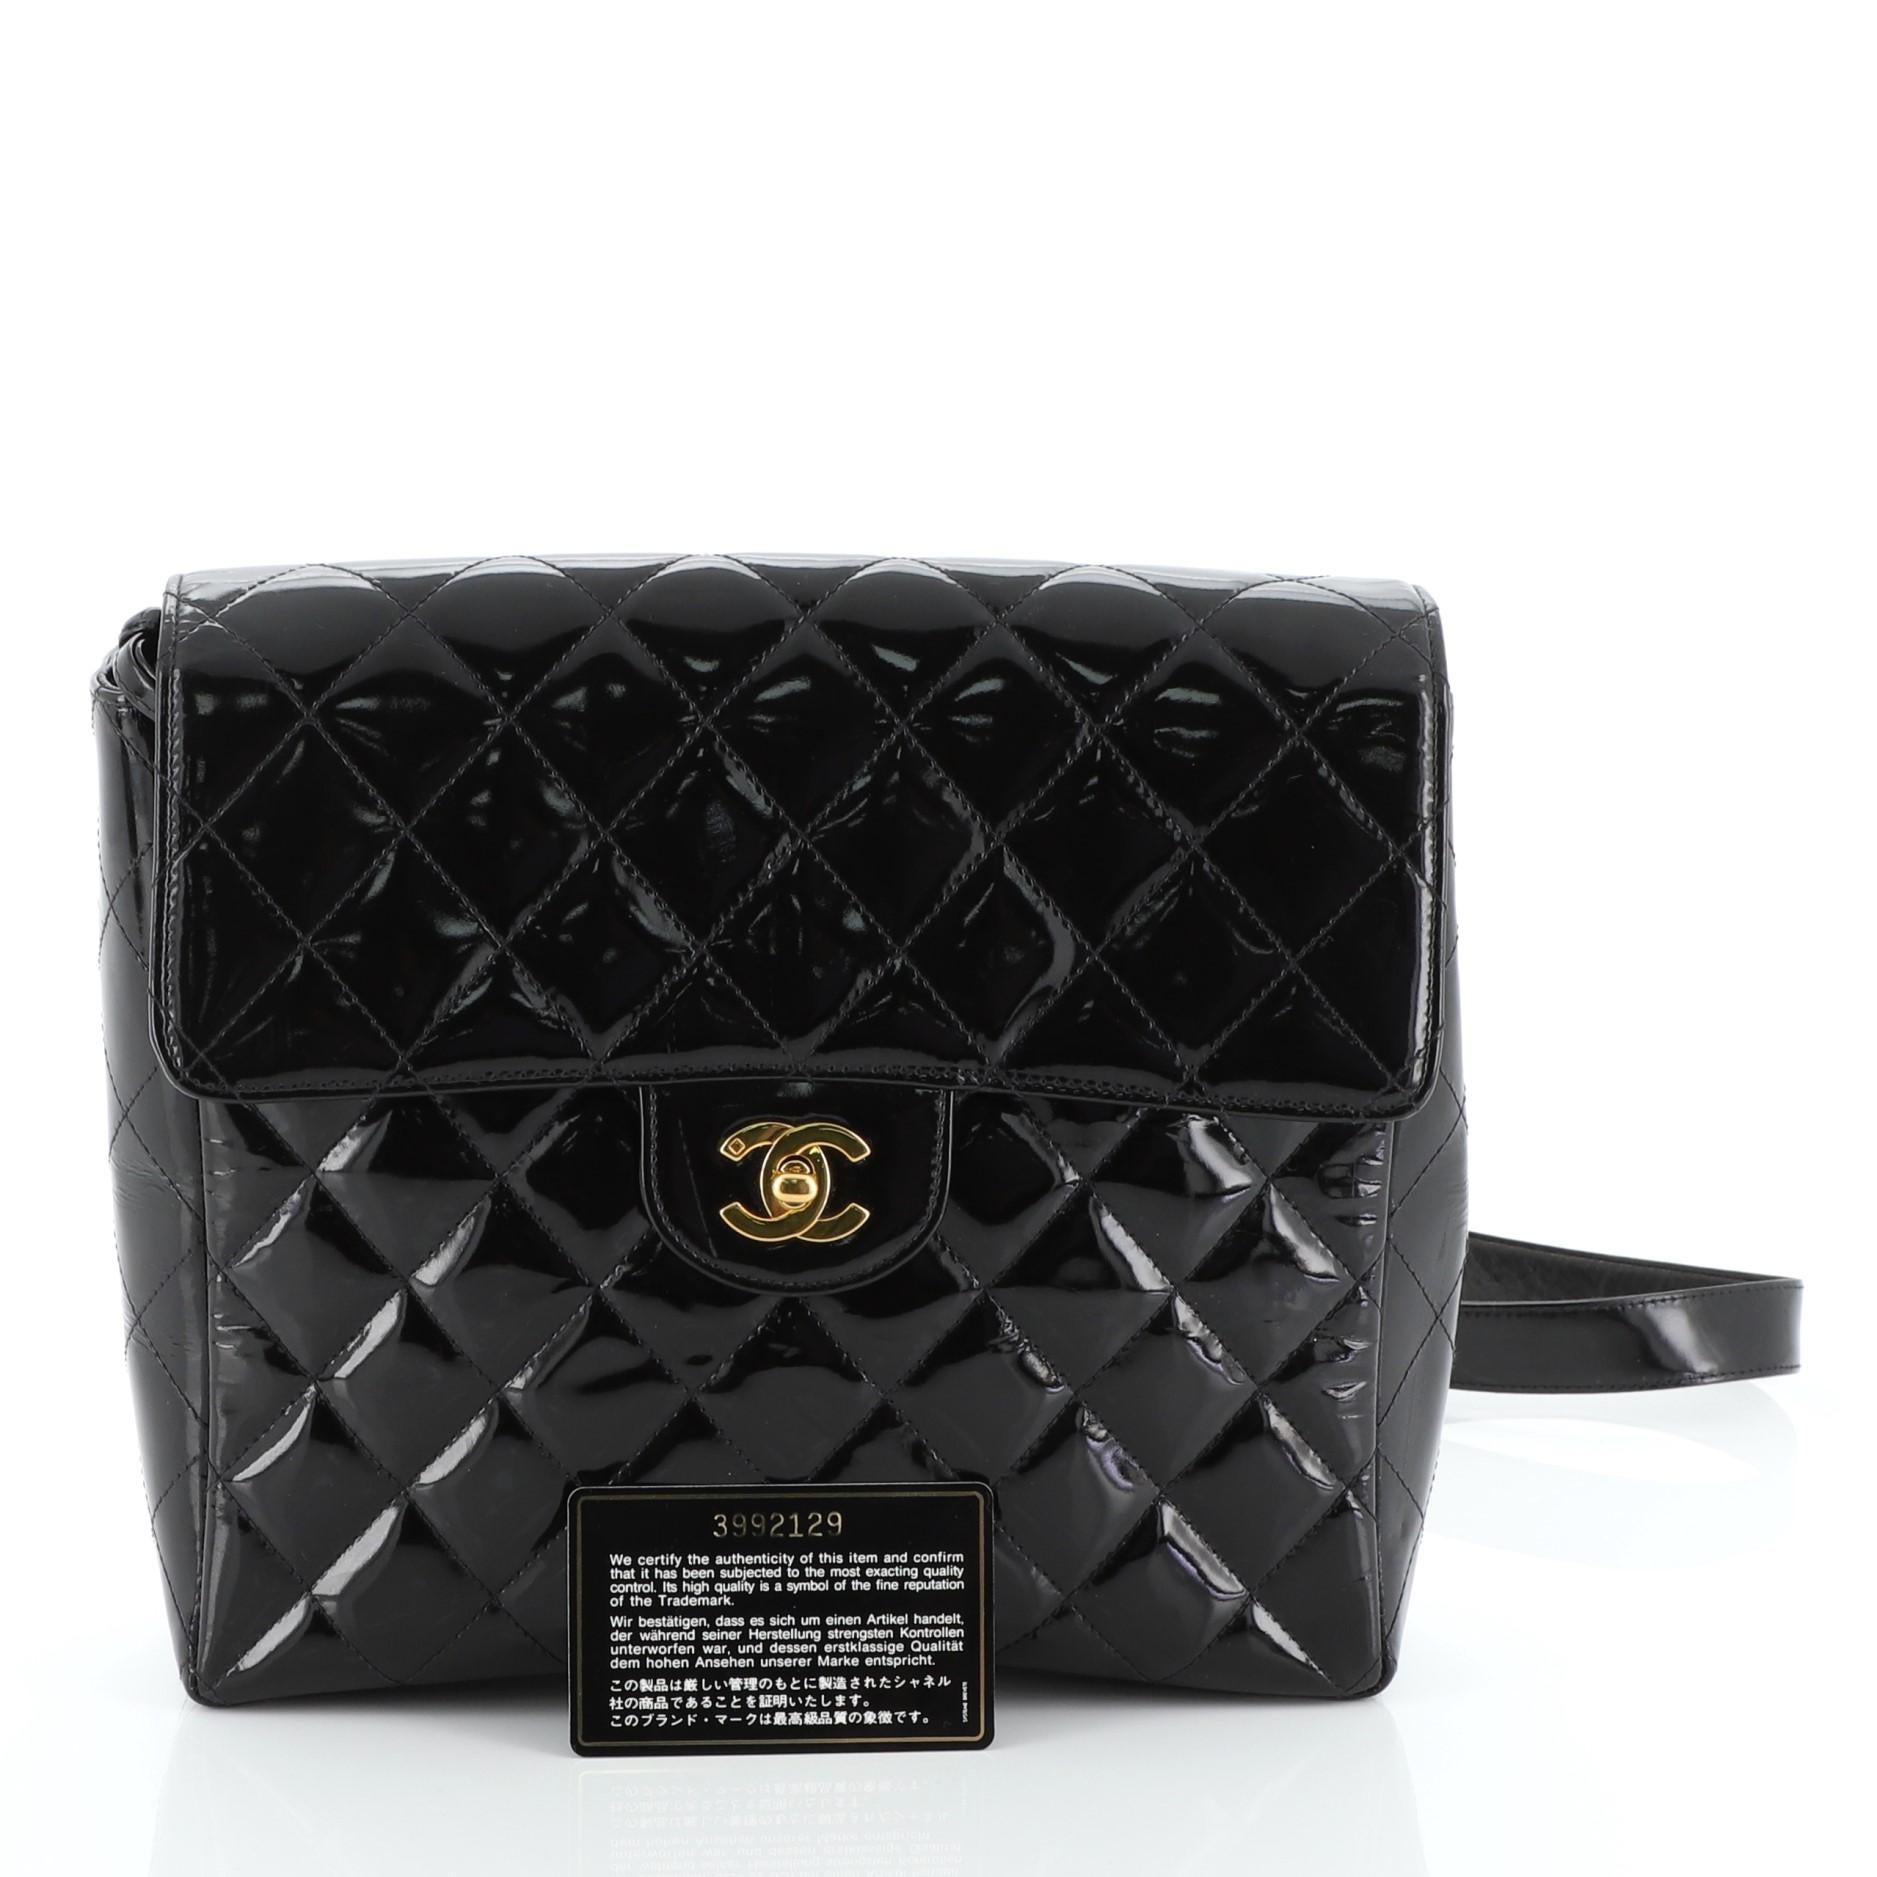 This Chanel Vintage Classic Flap Backpack Quilted Patent Medium, crafted from black quilted patent leather, features dual flat leather straps with woven-in leather chains and gold-tone hardware. Its CC turn-lock closure opens to a black leather